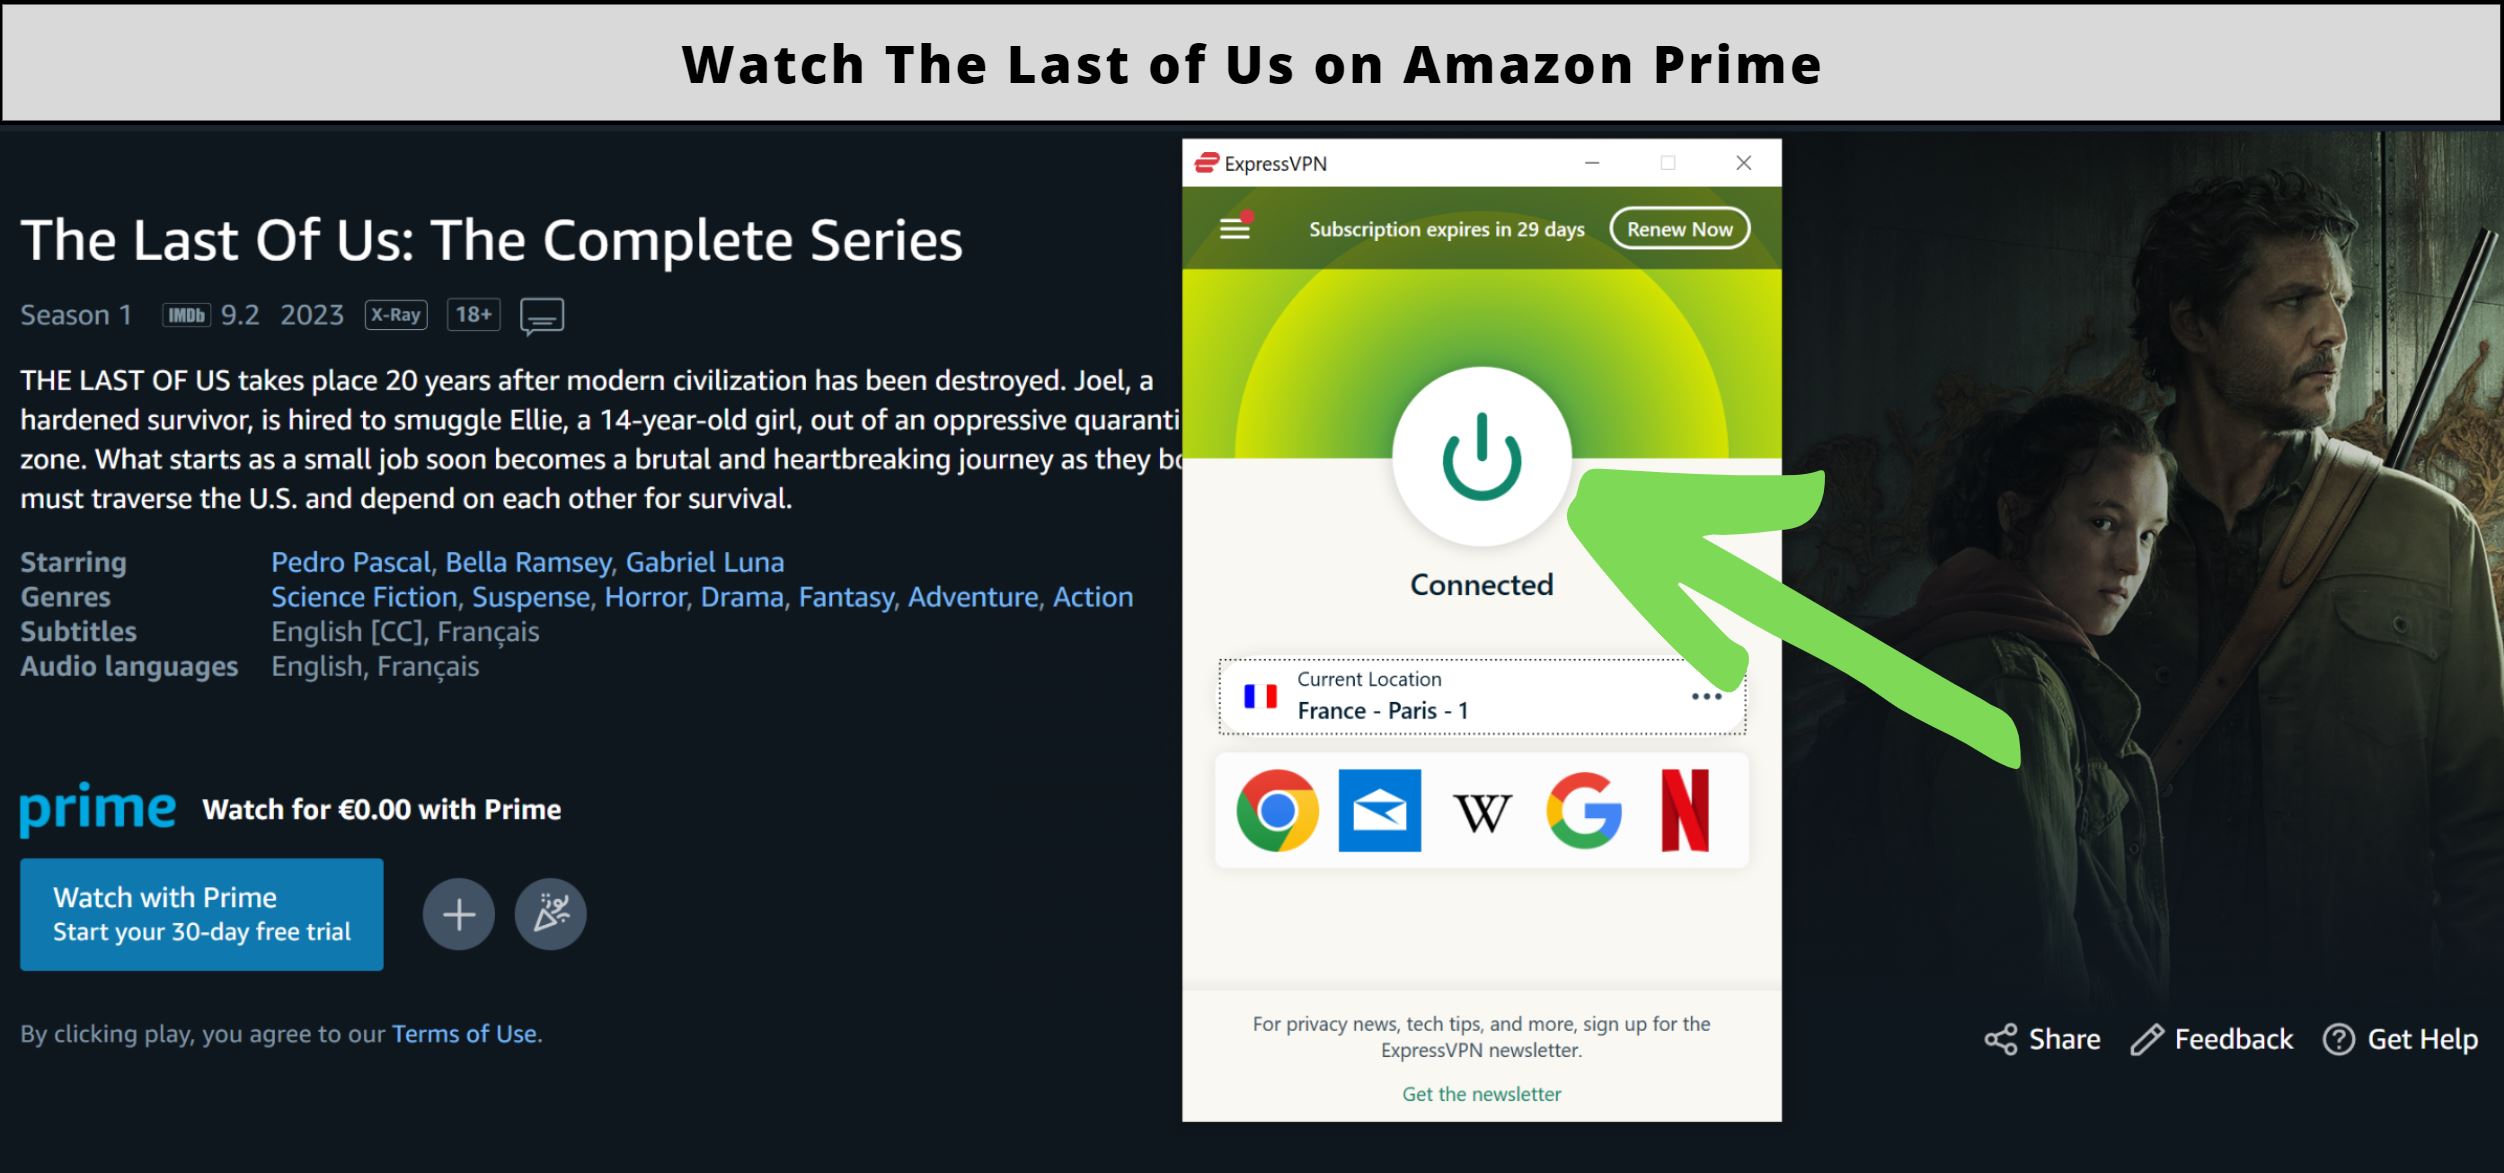 Is The Last of Us on Prime Video?